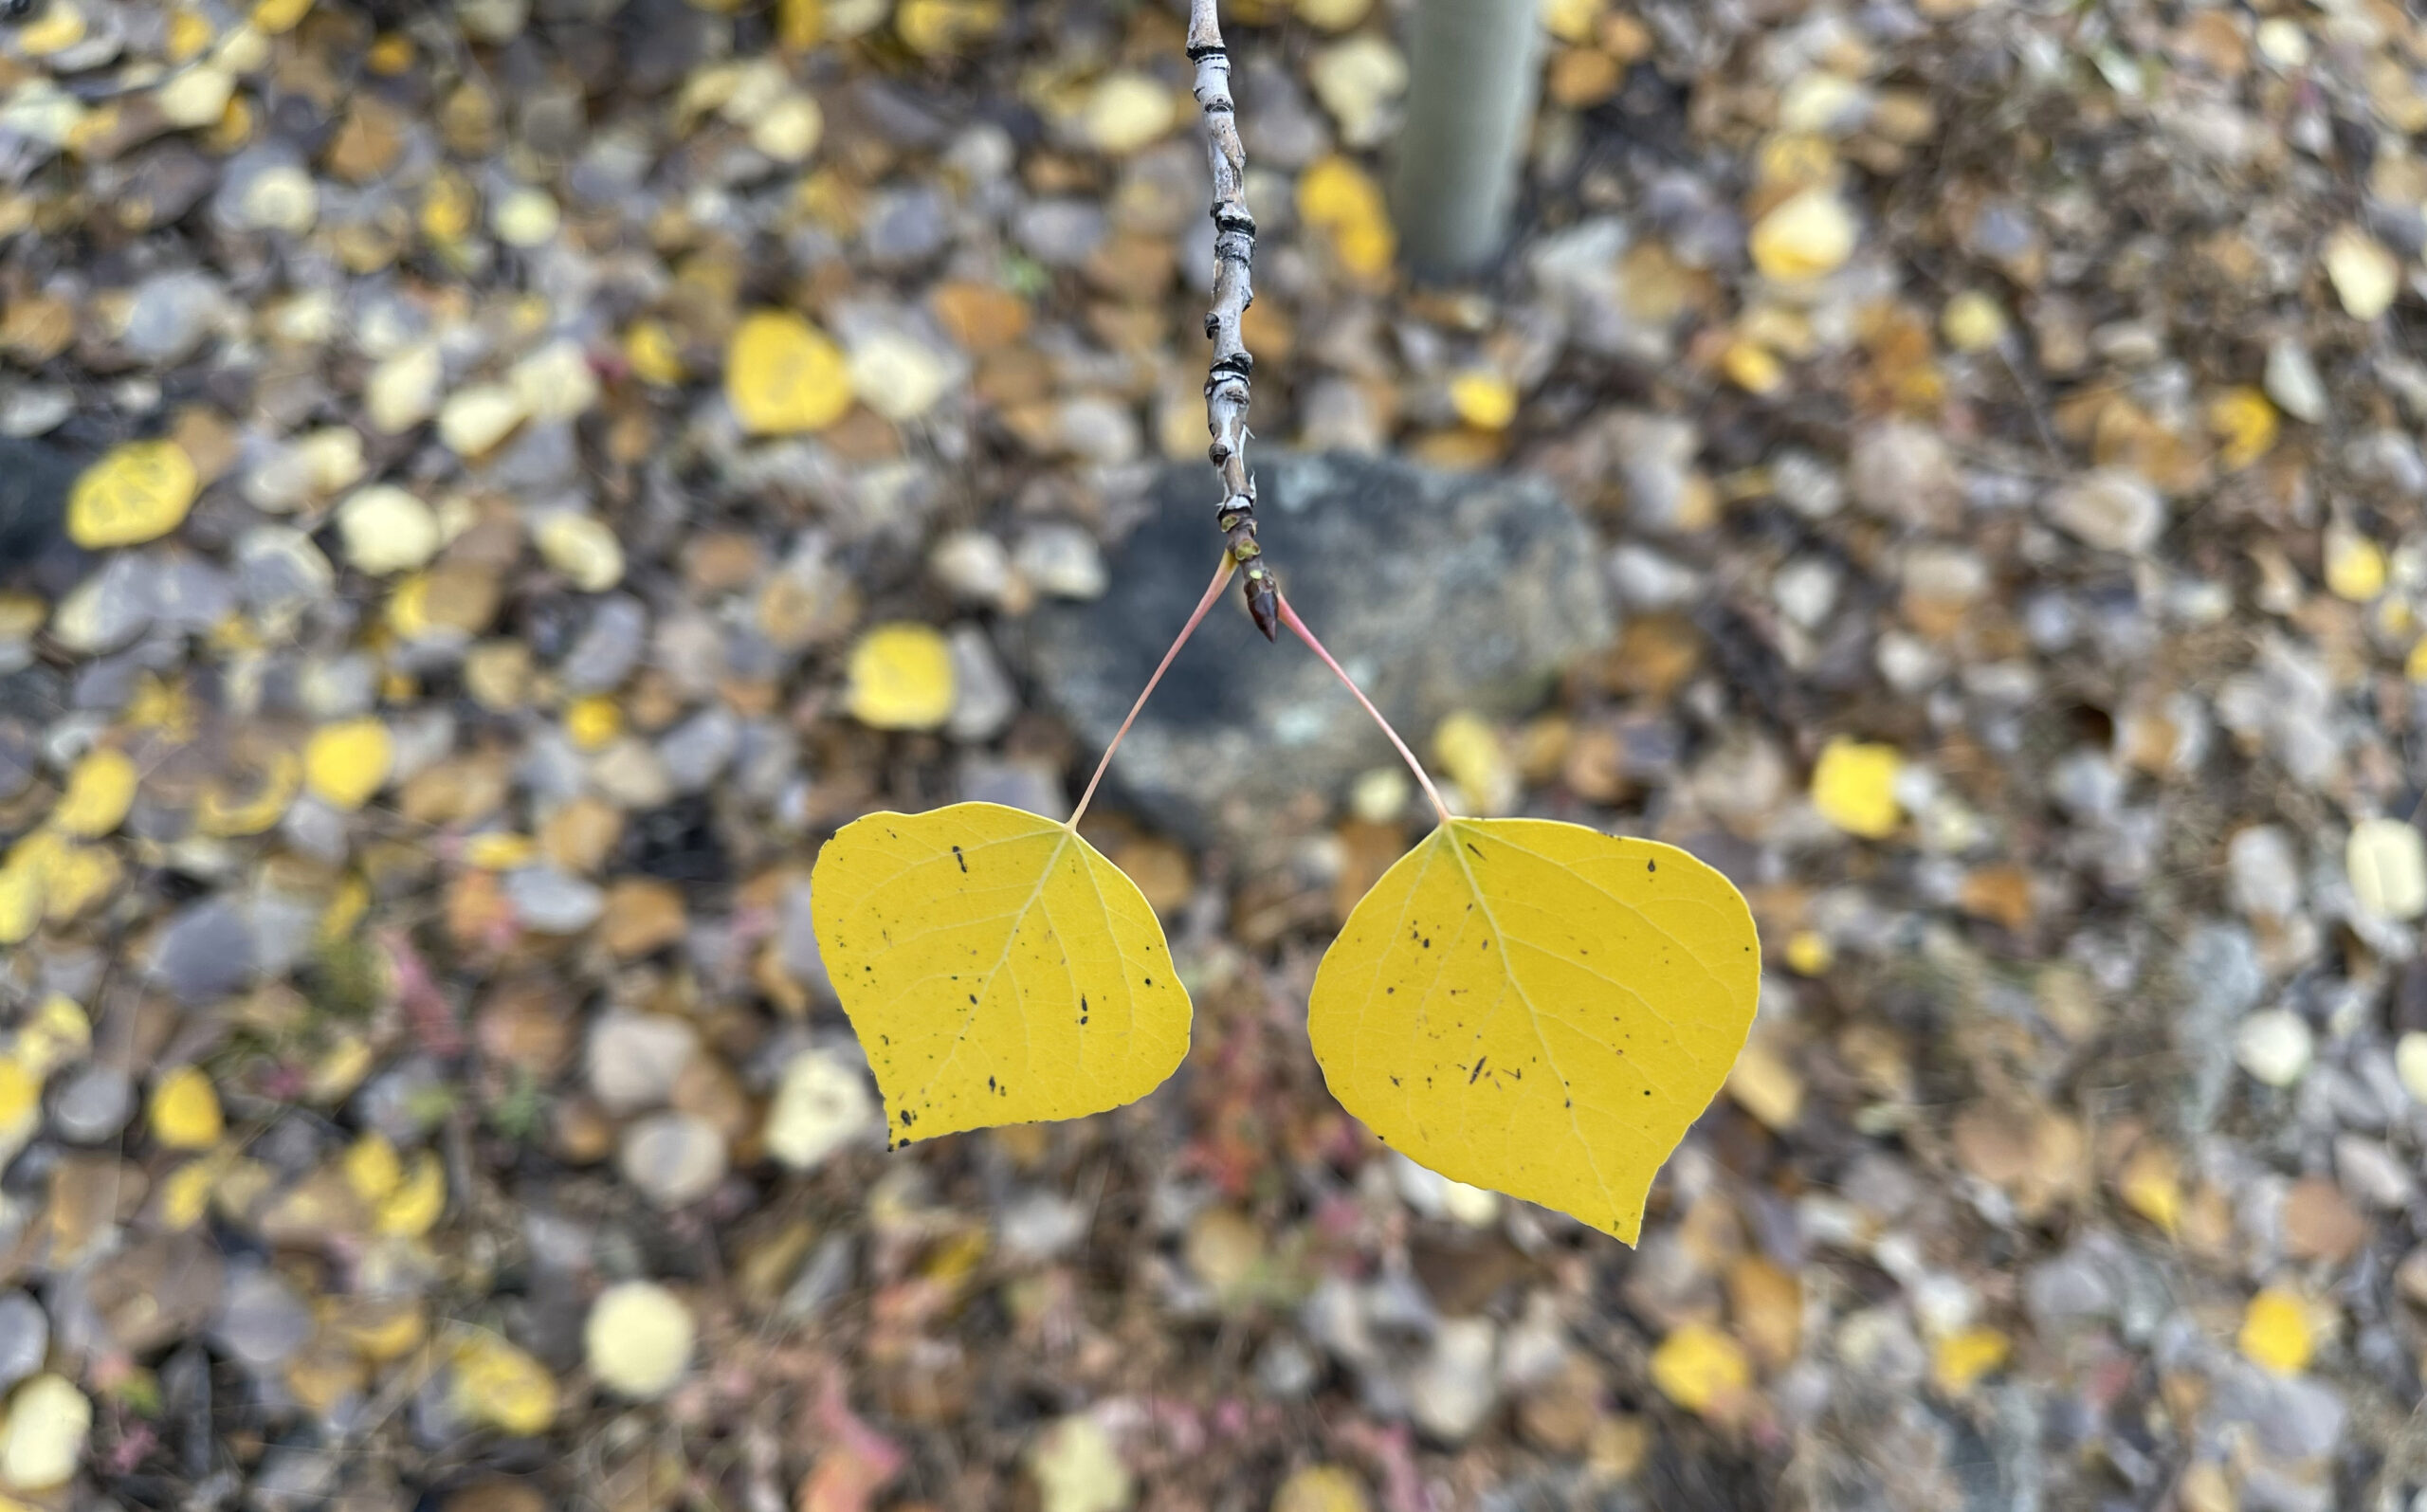 Winter Walks and Tree Detectives, LEAF